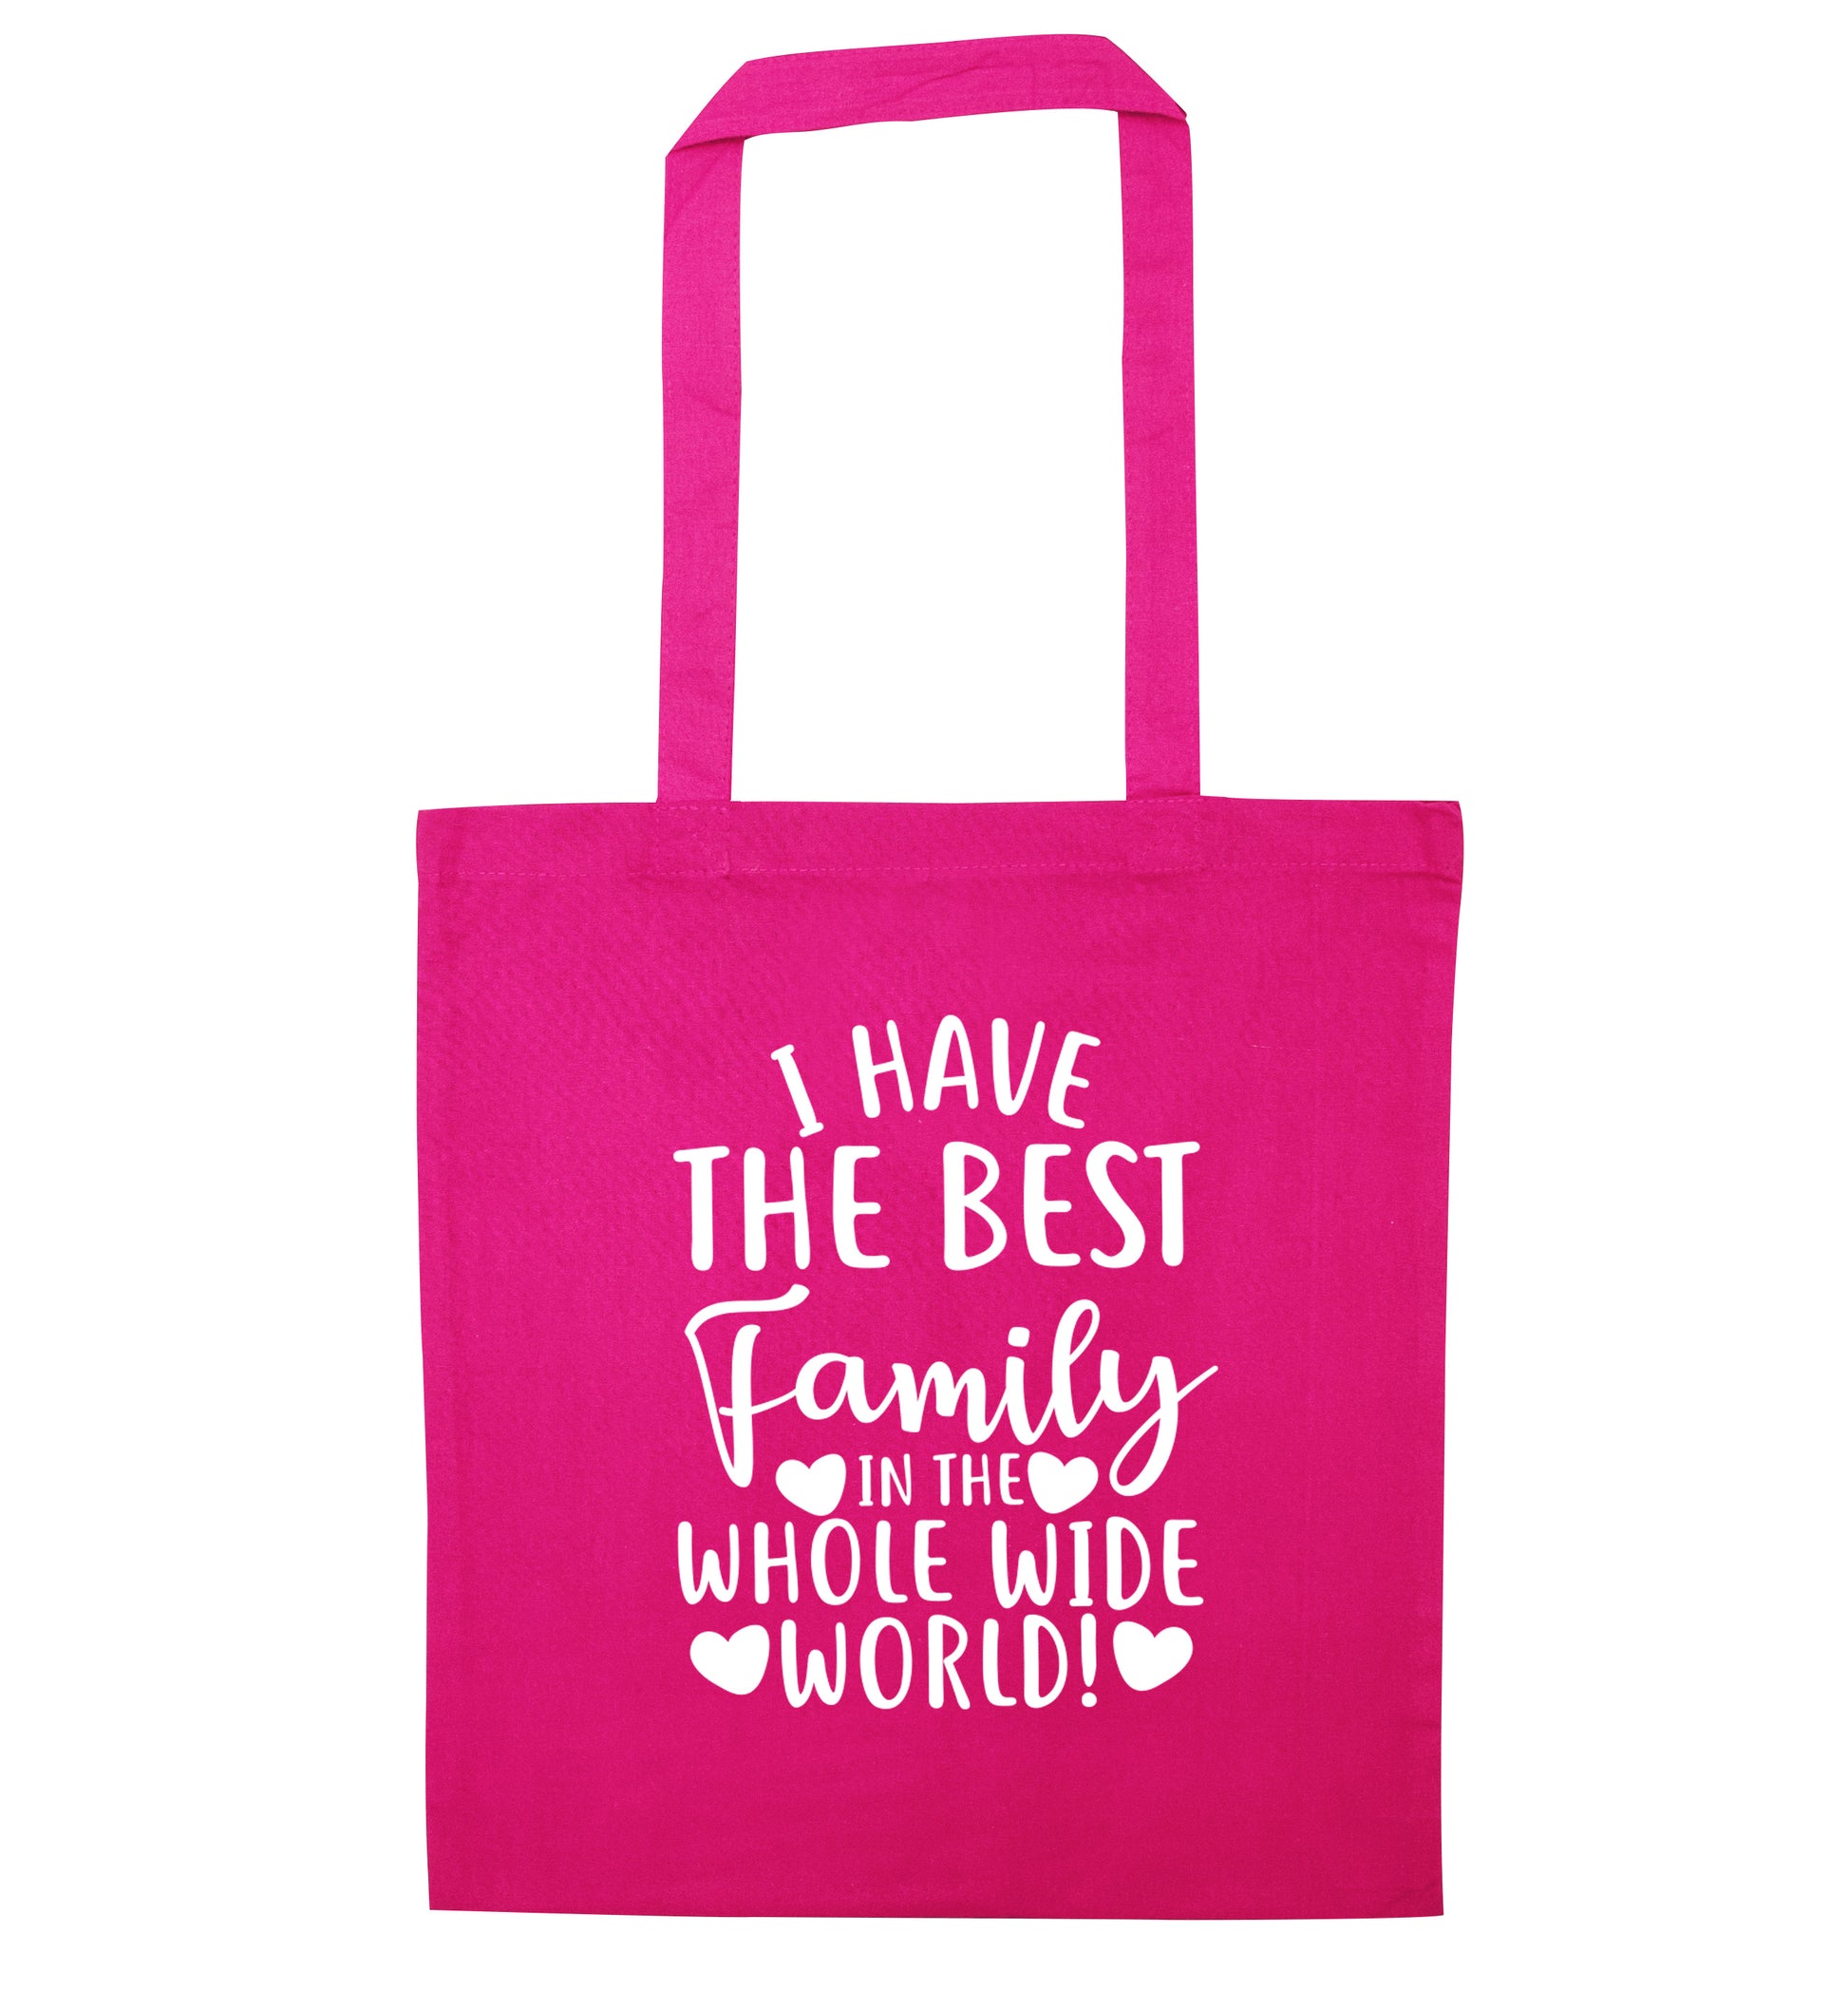 I have the best family in the whole wide world! pink tote bag